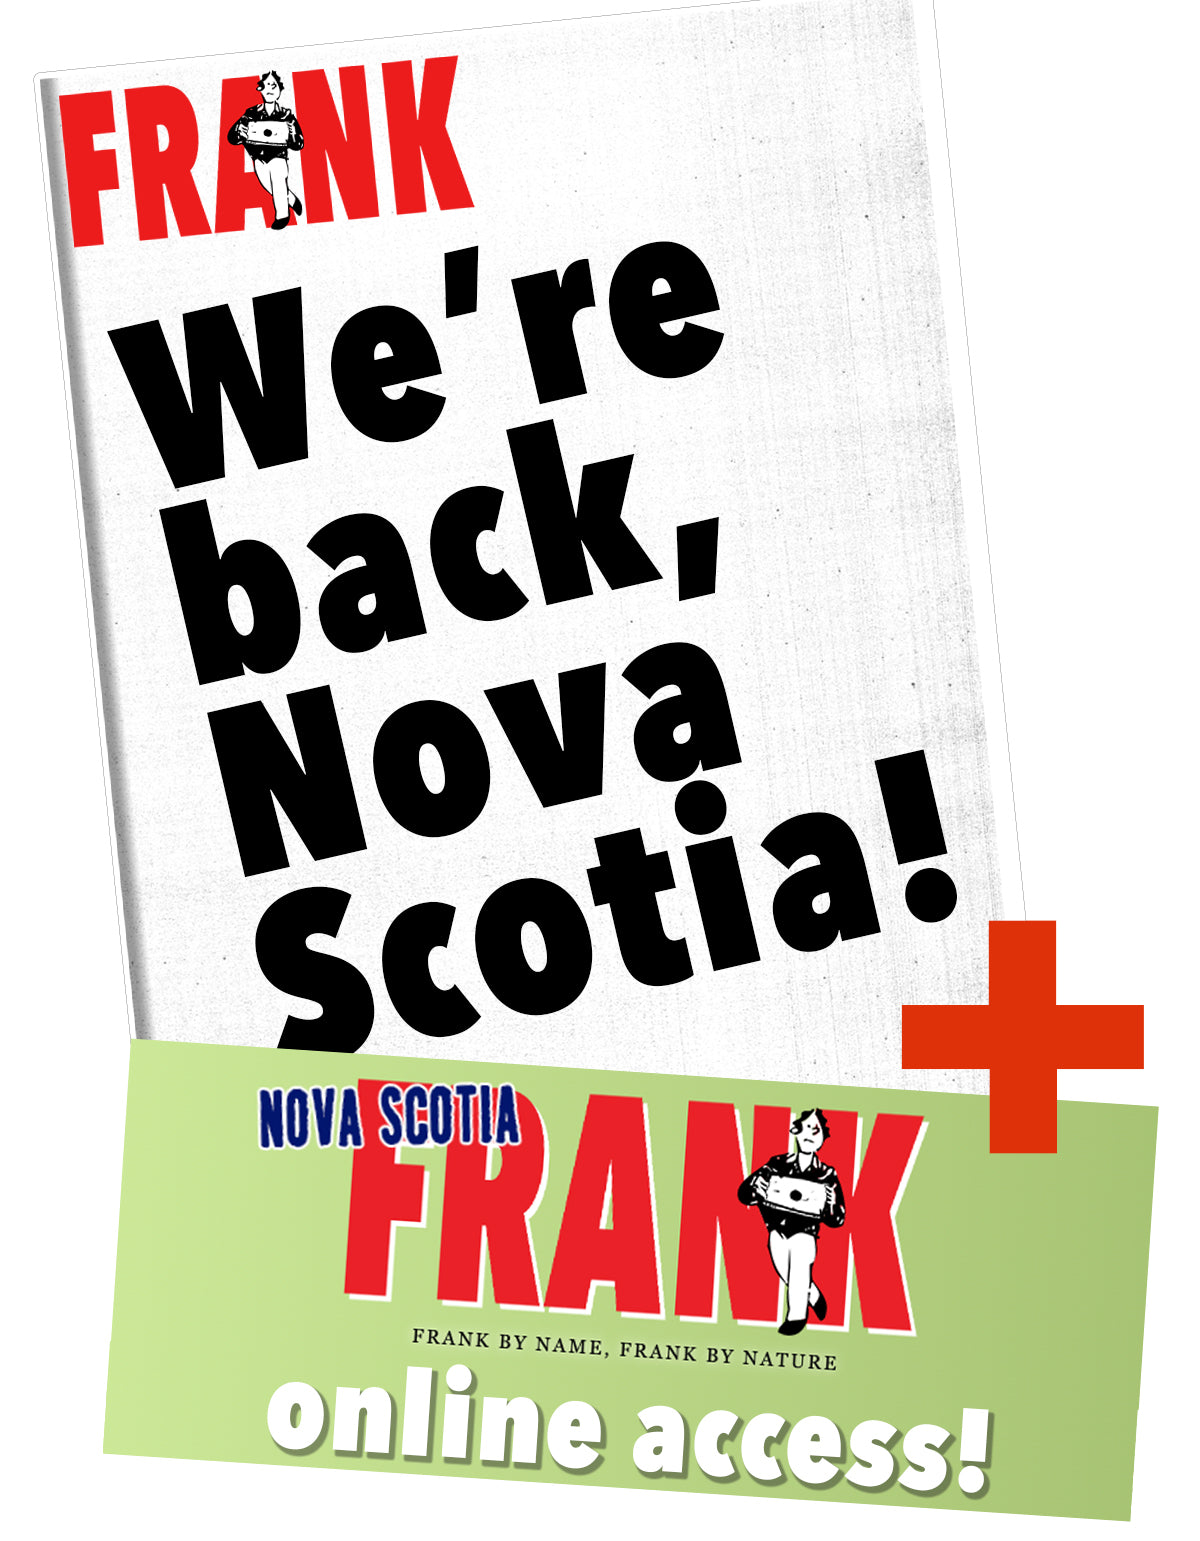 COMBO Print and Online Subscription to Frank Magazine, Nova Scotia Edition